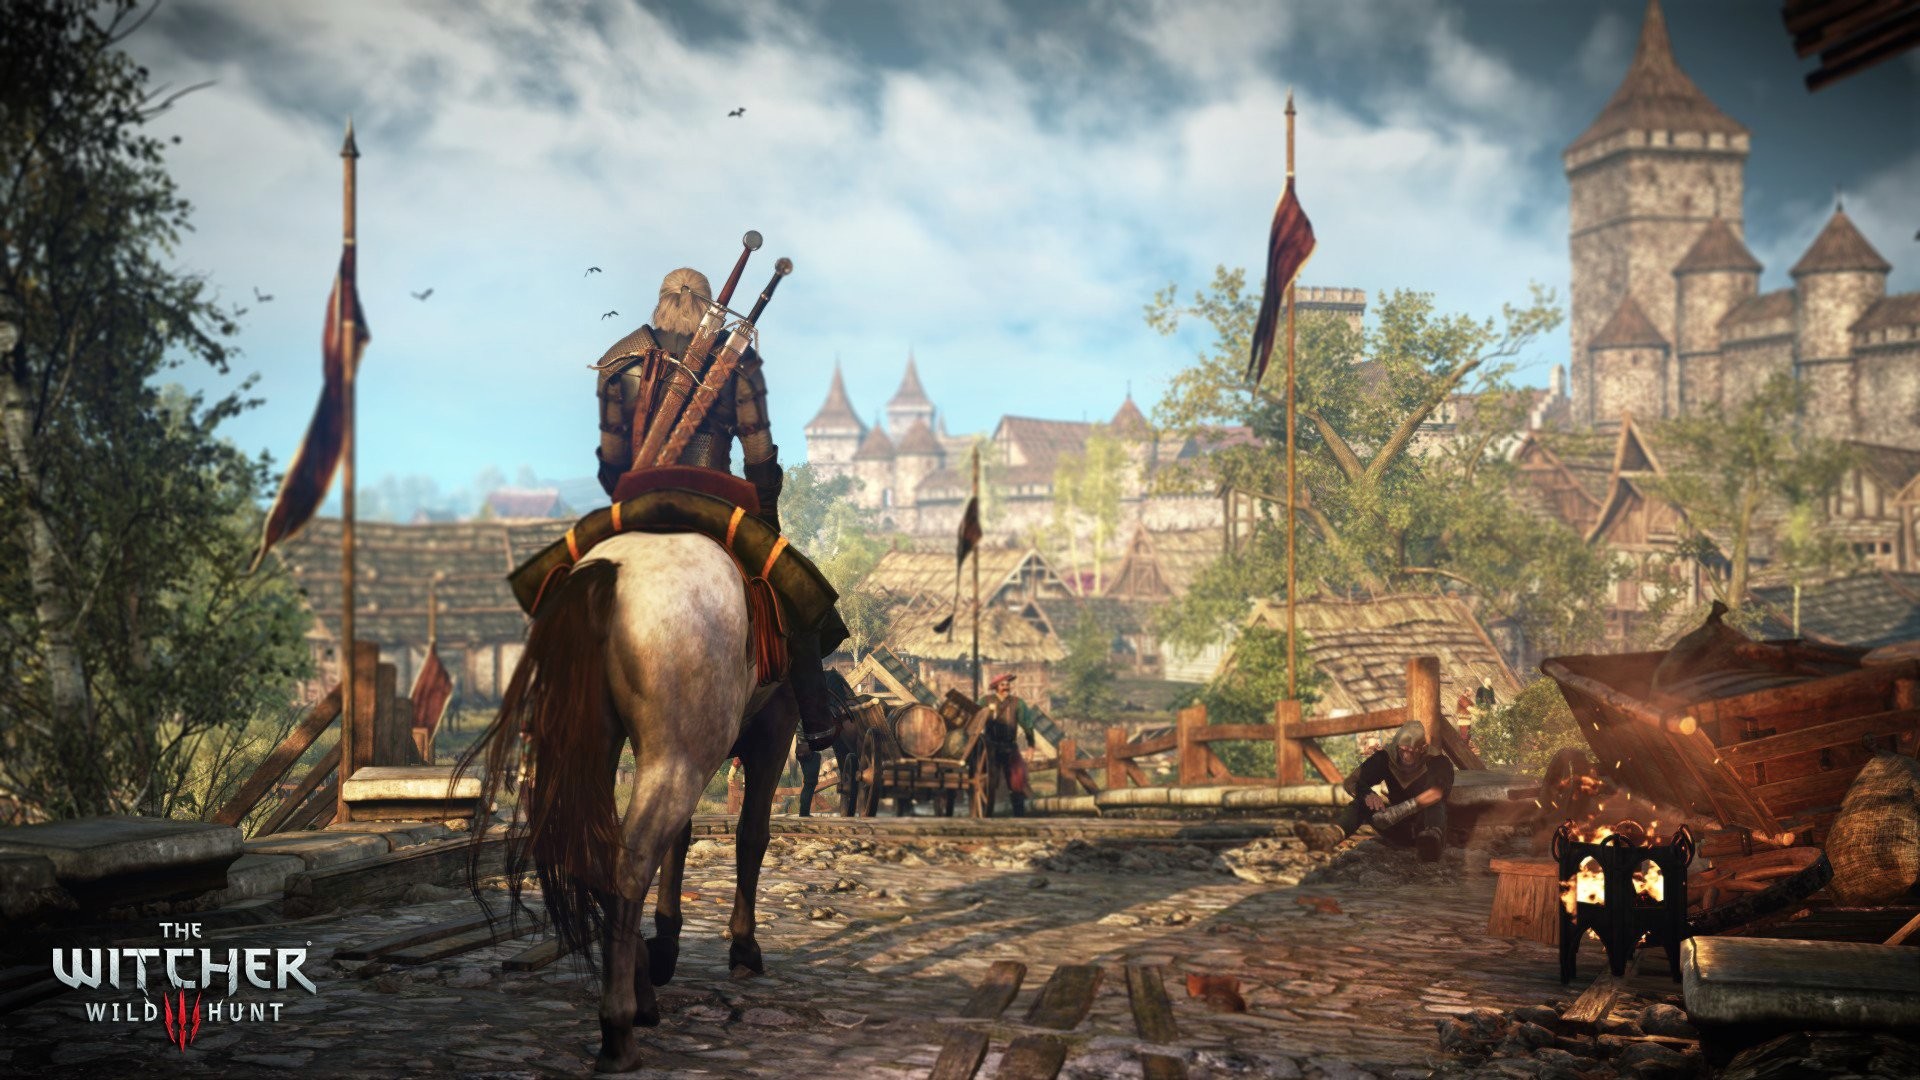 Video Game – The Witcher 3 Wild Hunt The Witcher Wallpaper